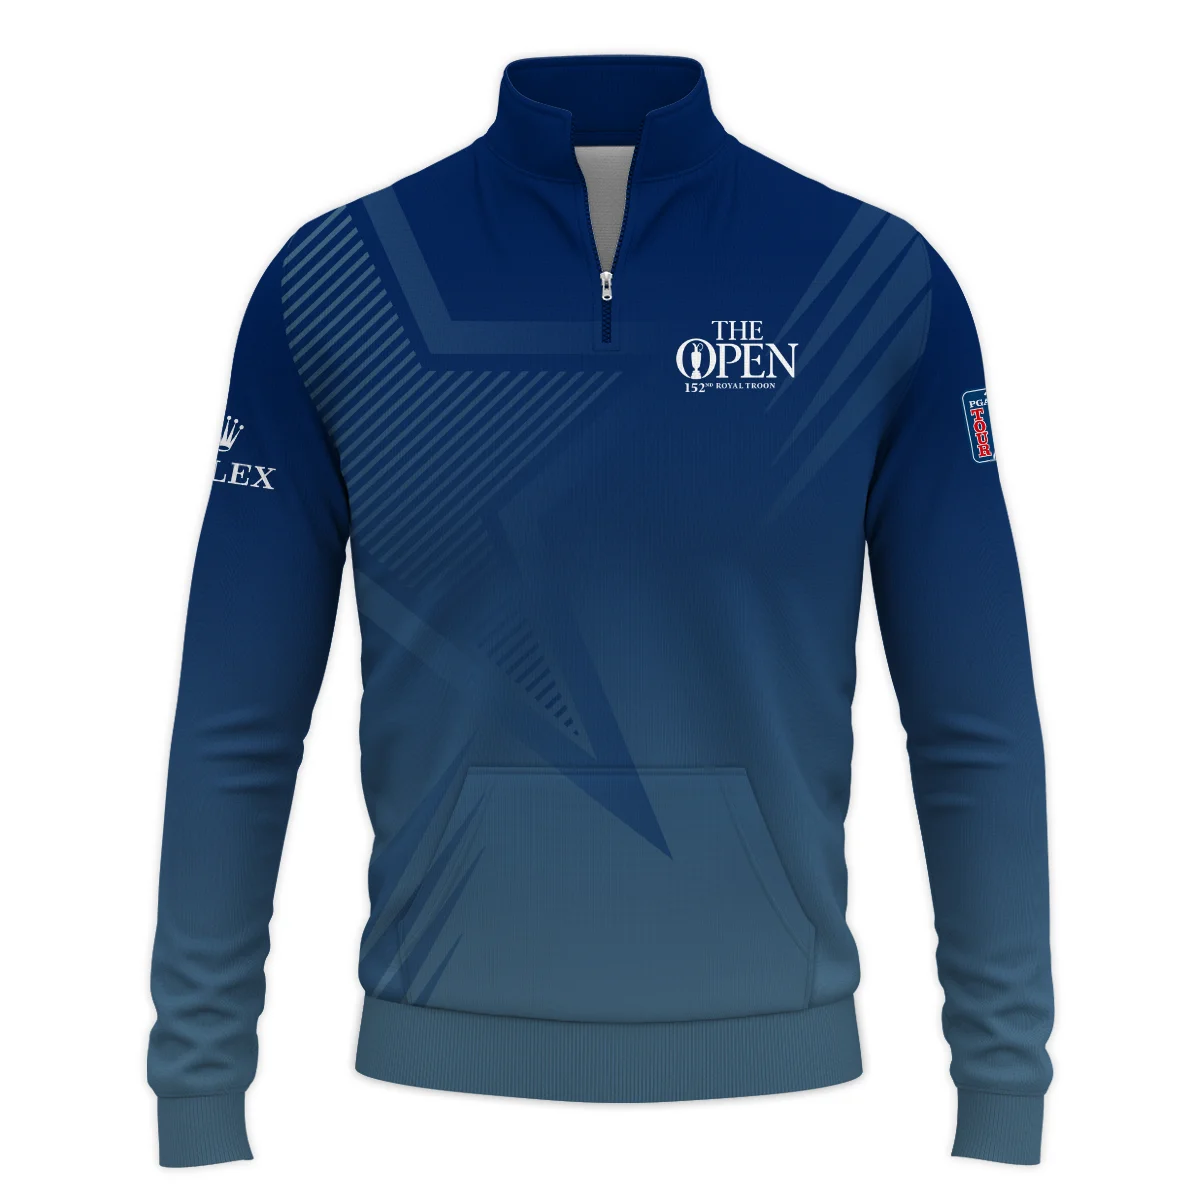 Rolex 152nd Open Championship Abstract Background Dark Blue Gradient Star Line Performance Quarter Zip Sweatshirt With Pockets All Over Prints HOTOP260624A04ROXTS